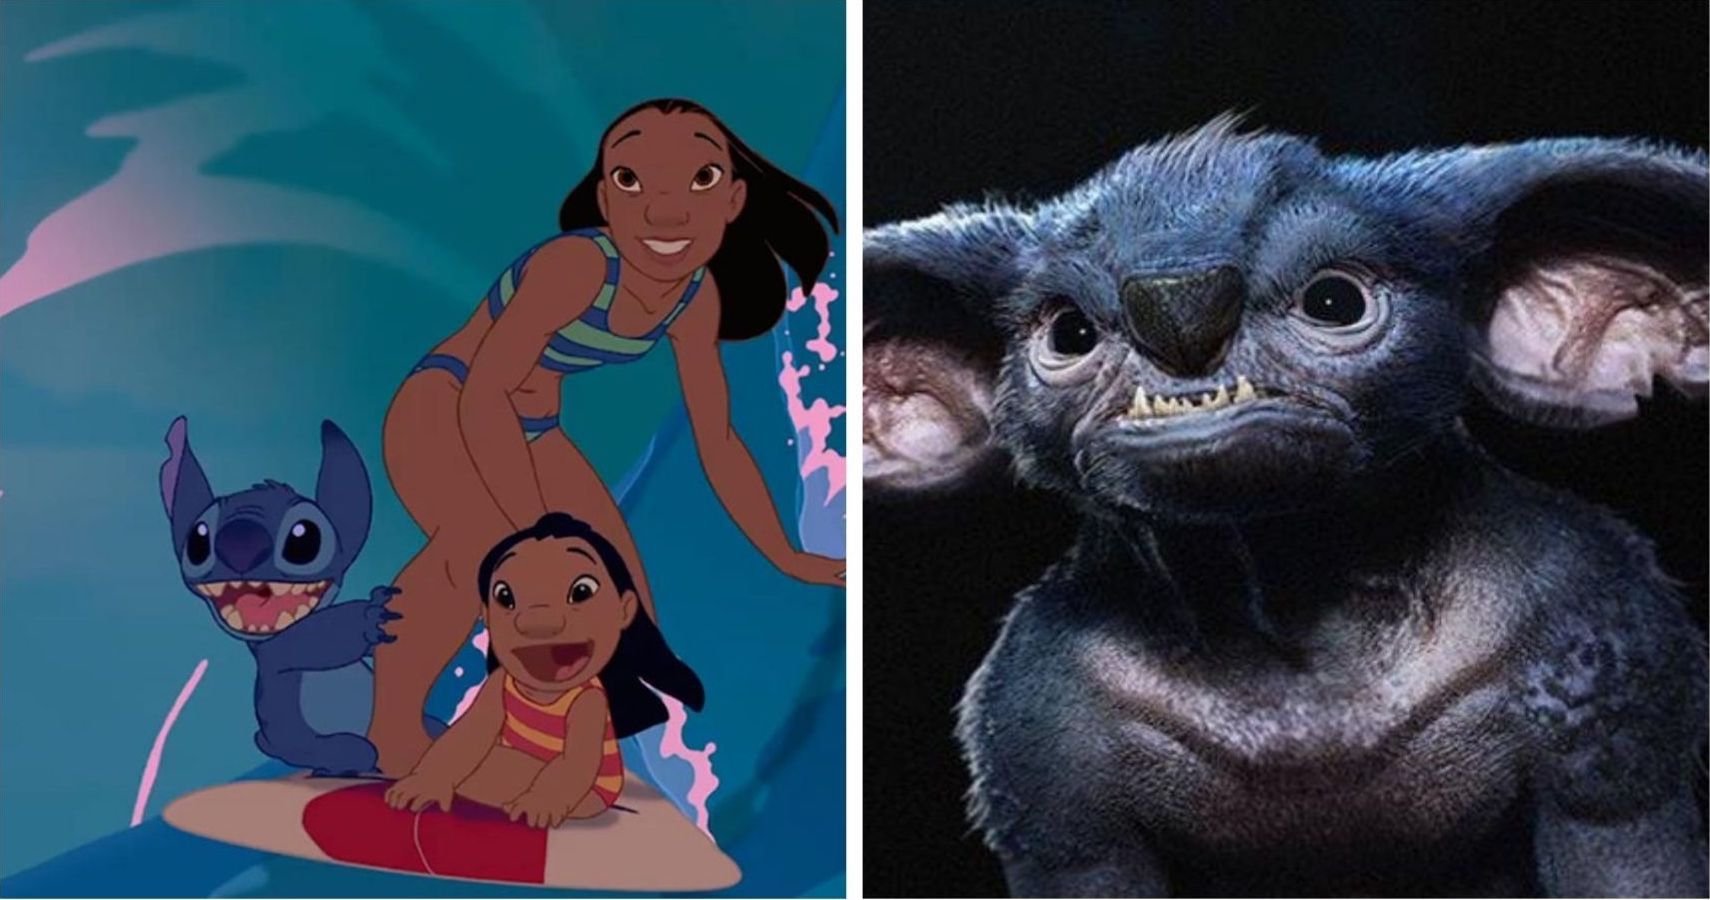 Disney Takes Aim At A Live-Action Lilo And Stitch, Movies